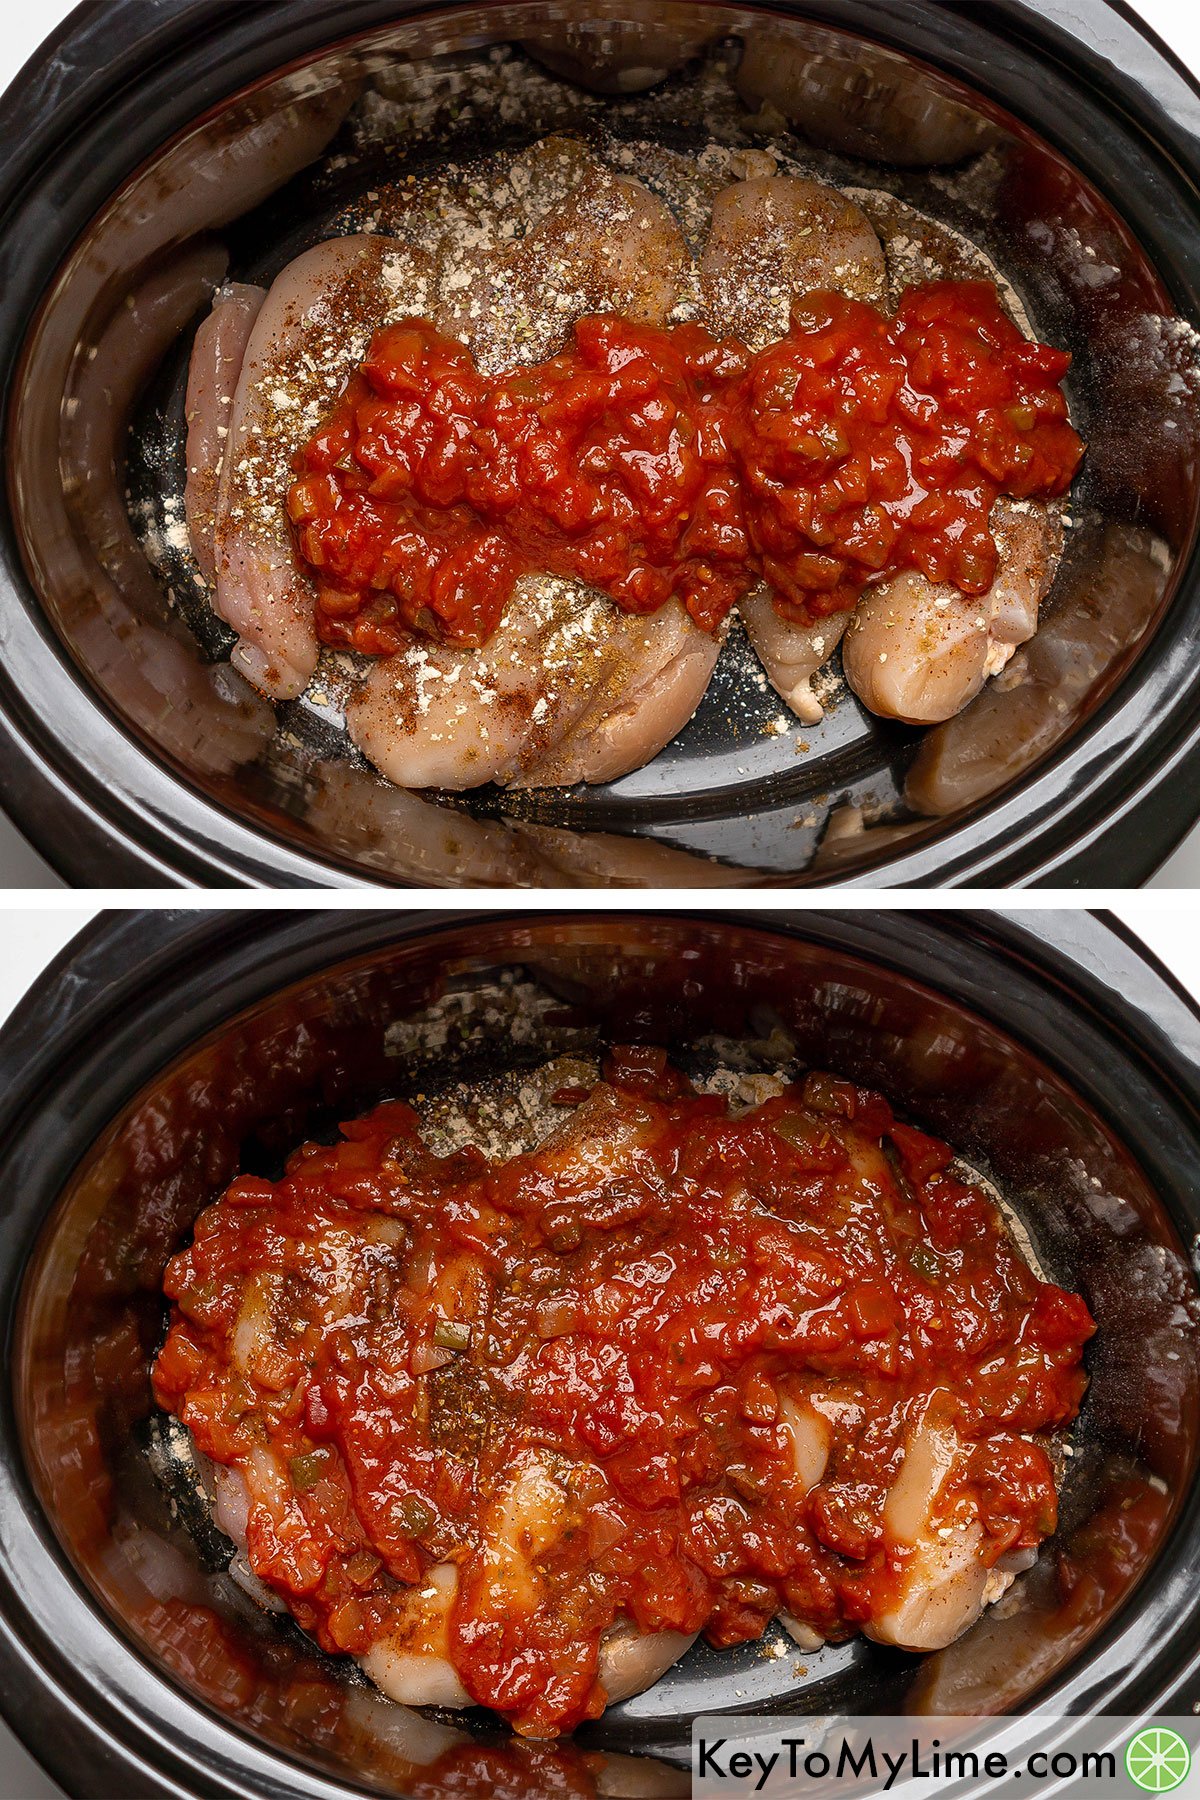 Spreading salsa over raw chicken breast in a slow cooker.